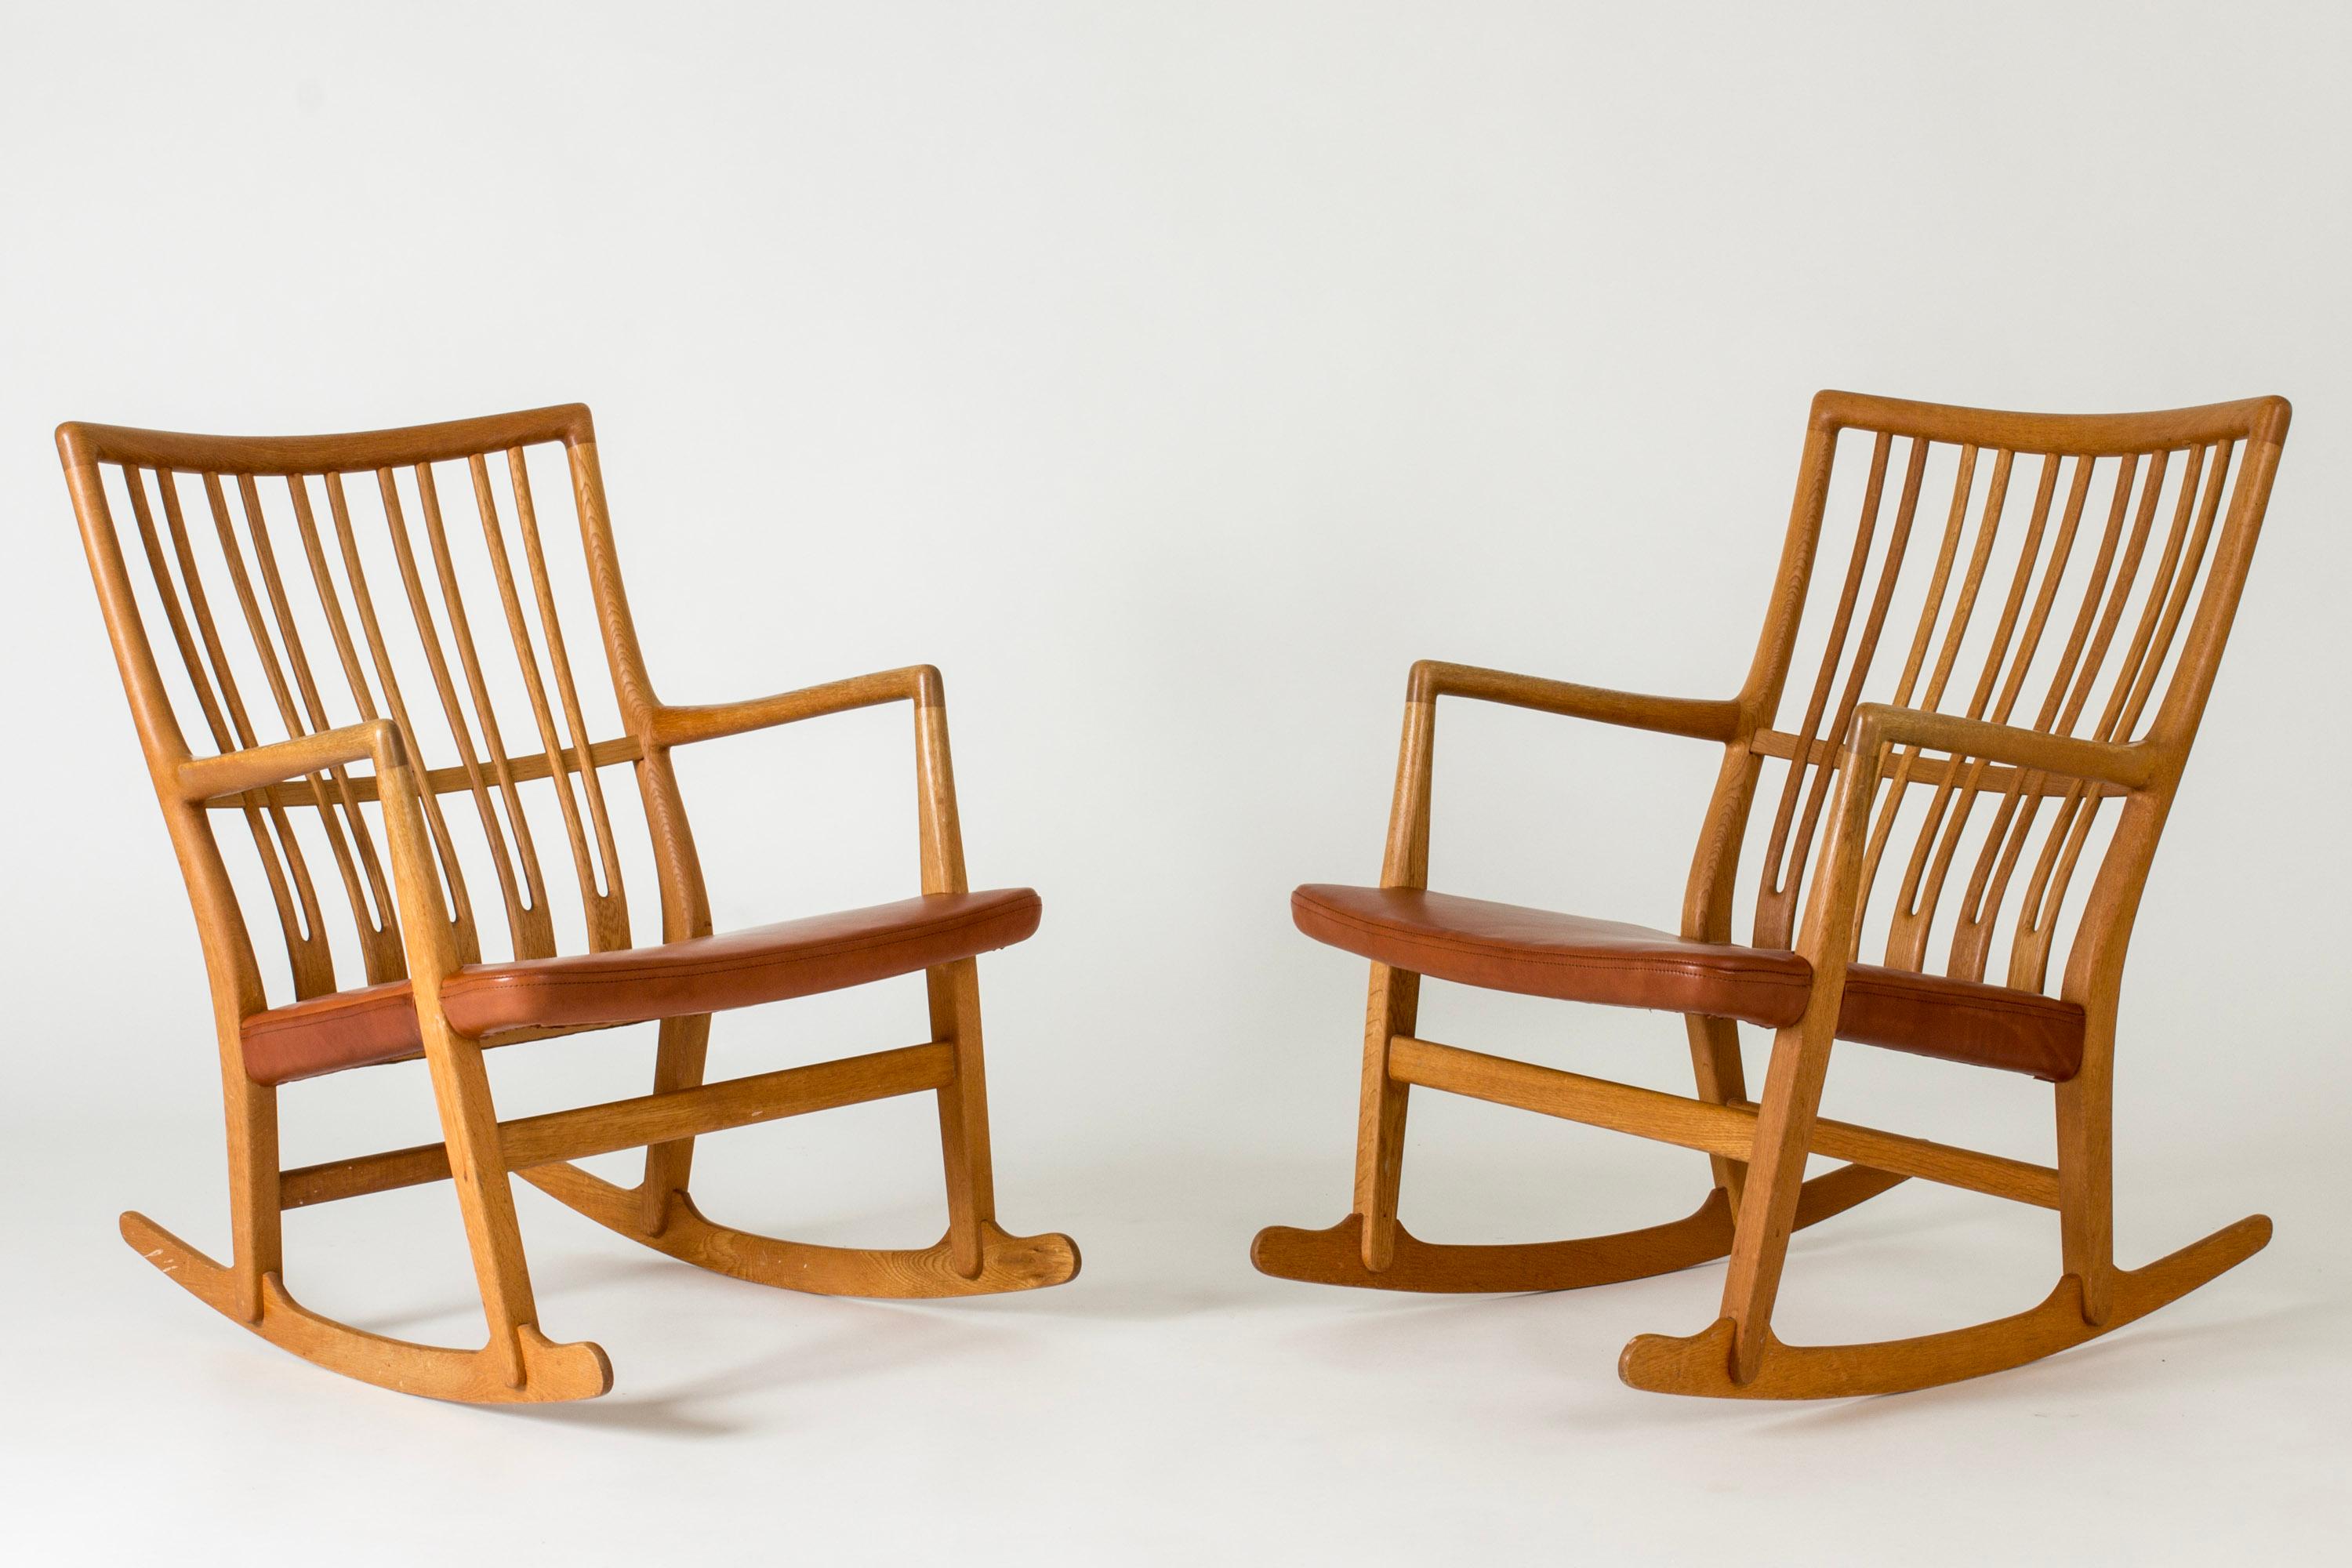 Pair fof “ML-33” rocking chair by Hans J. Wegner, made from oak with leather seats. Beautiful ribbed backrests, smooth lines and lovely woodgrain.